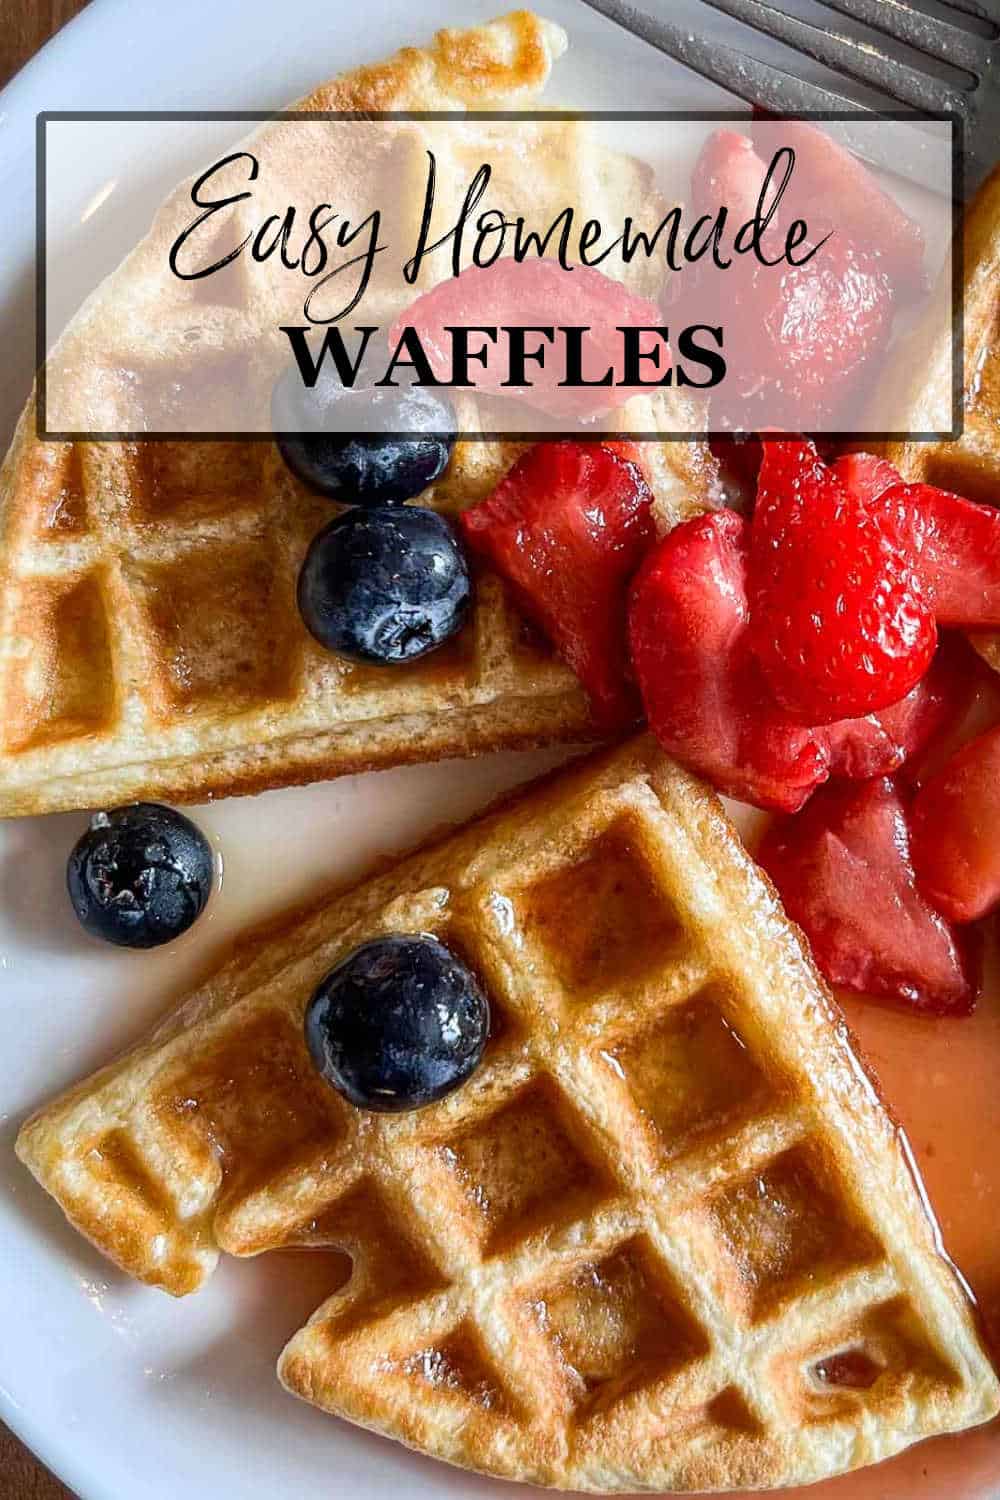 Three pieces of a Homemade Waffle on a white place with strawberries and blueberries and a little maple syrup in the wells of the waffle with a title banner across the top.